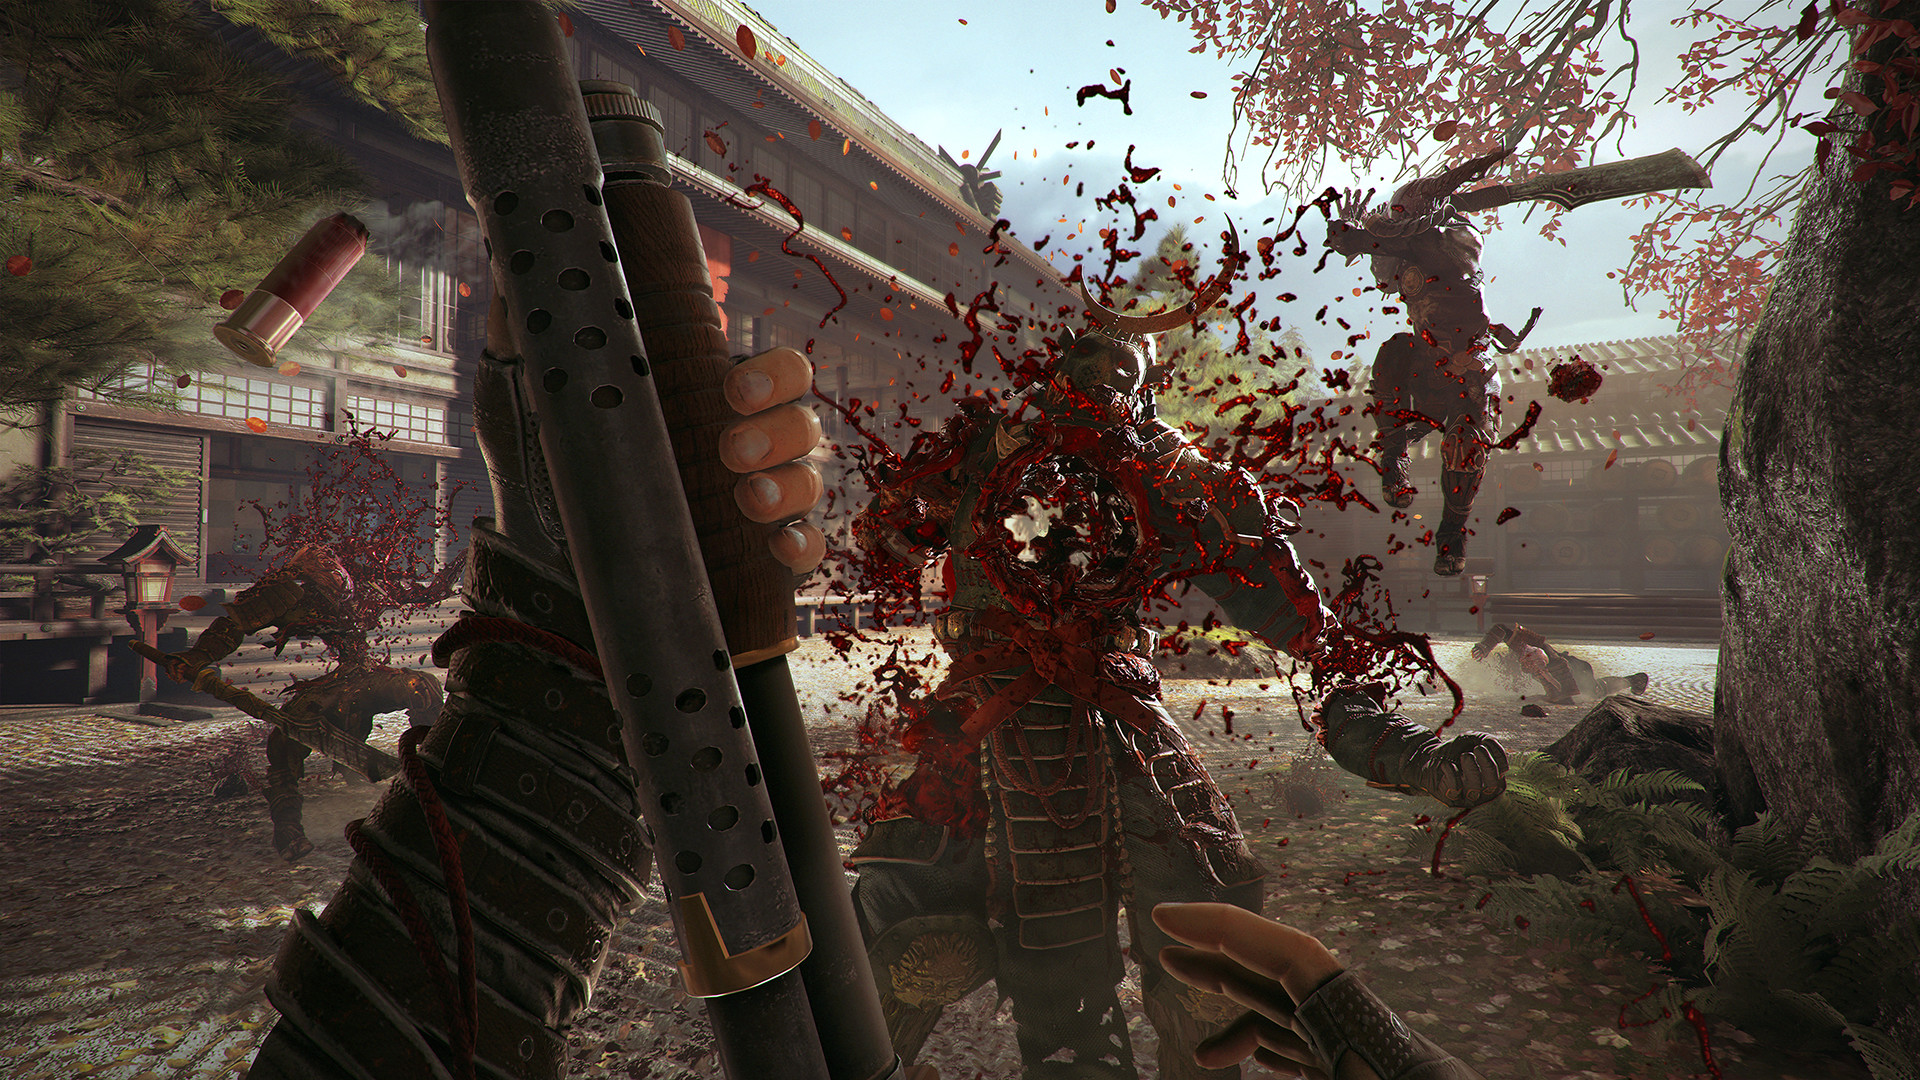 Shadow Warrior' launches on Steam